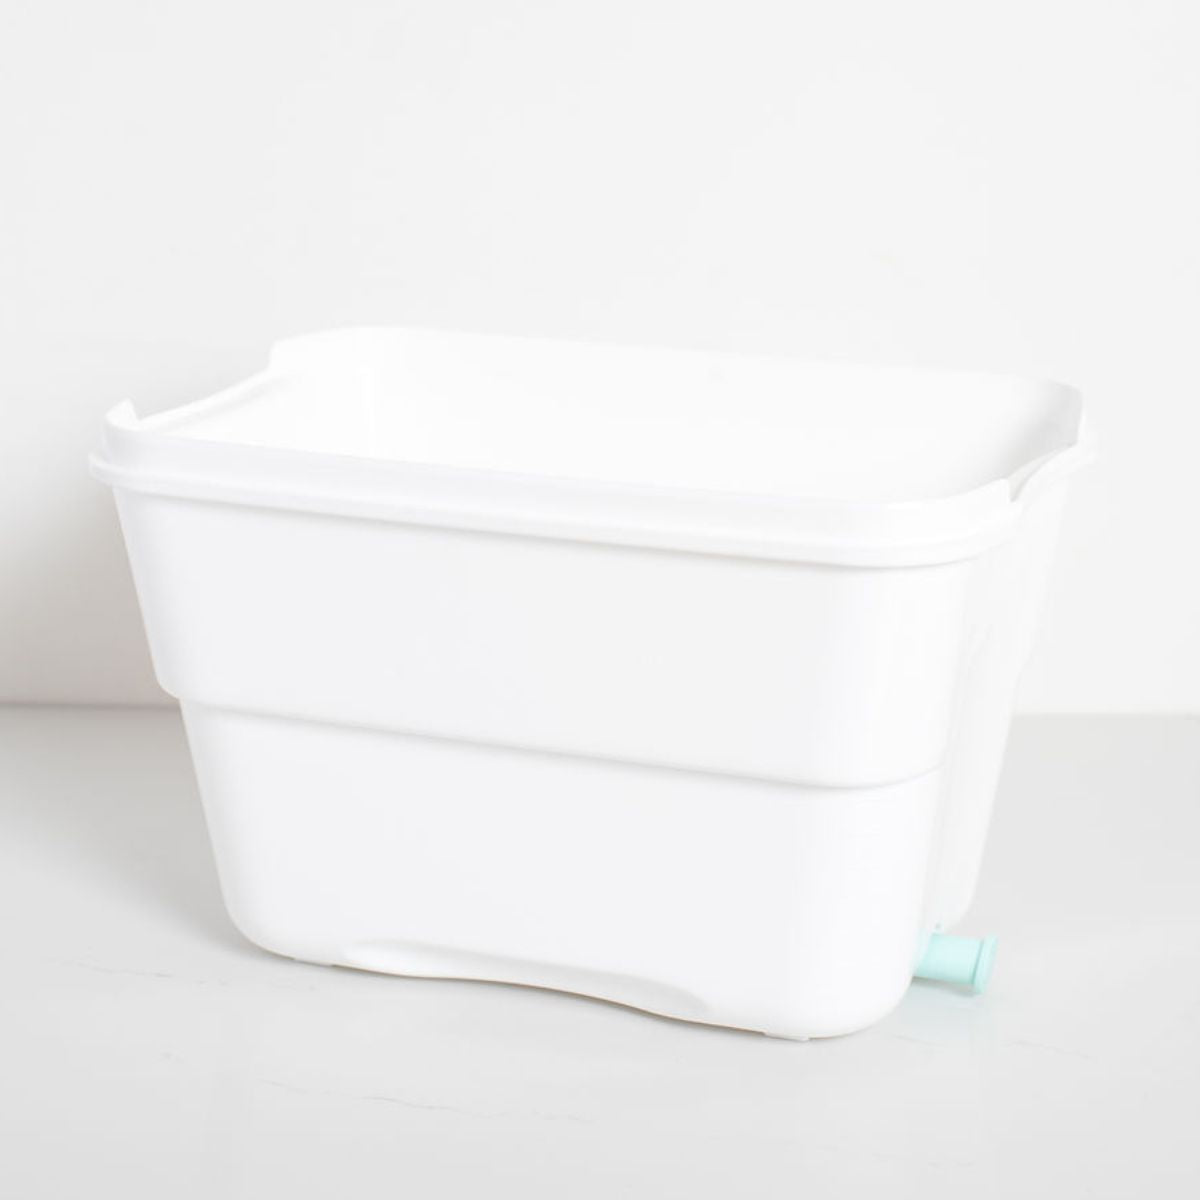 Spare Outer Container - Strucket, color_Aqua